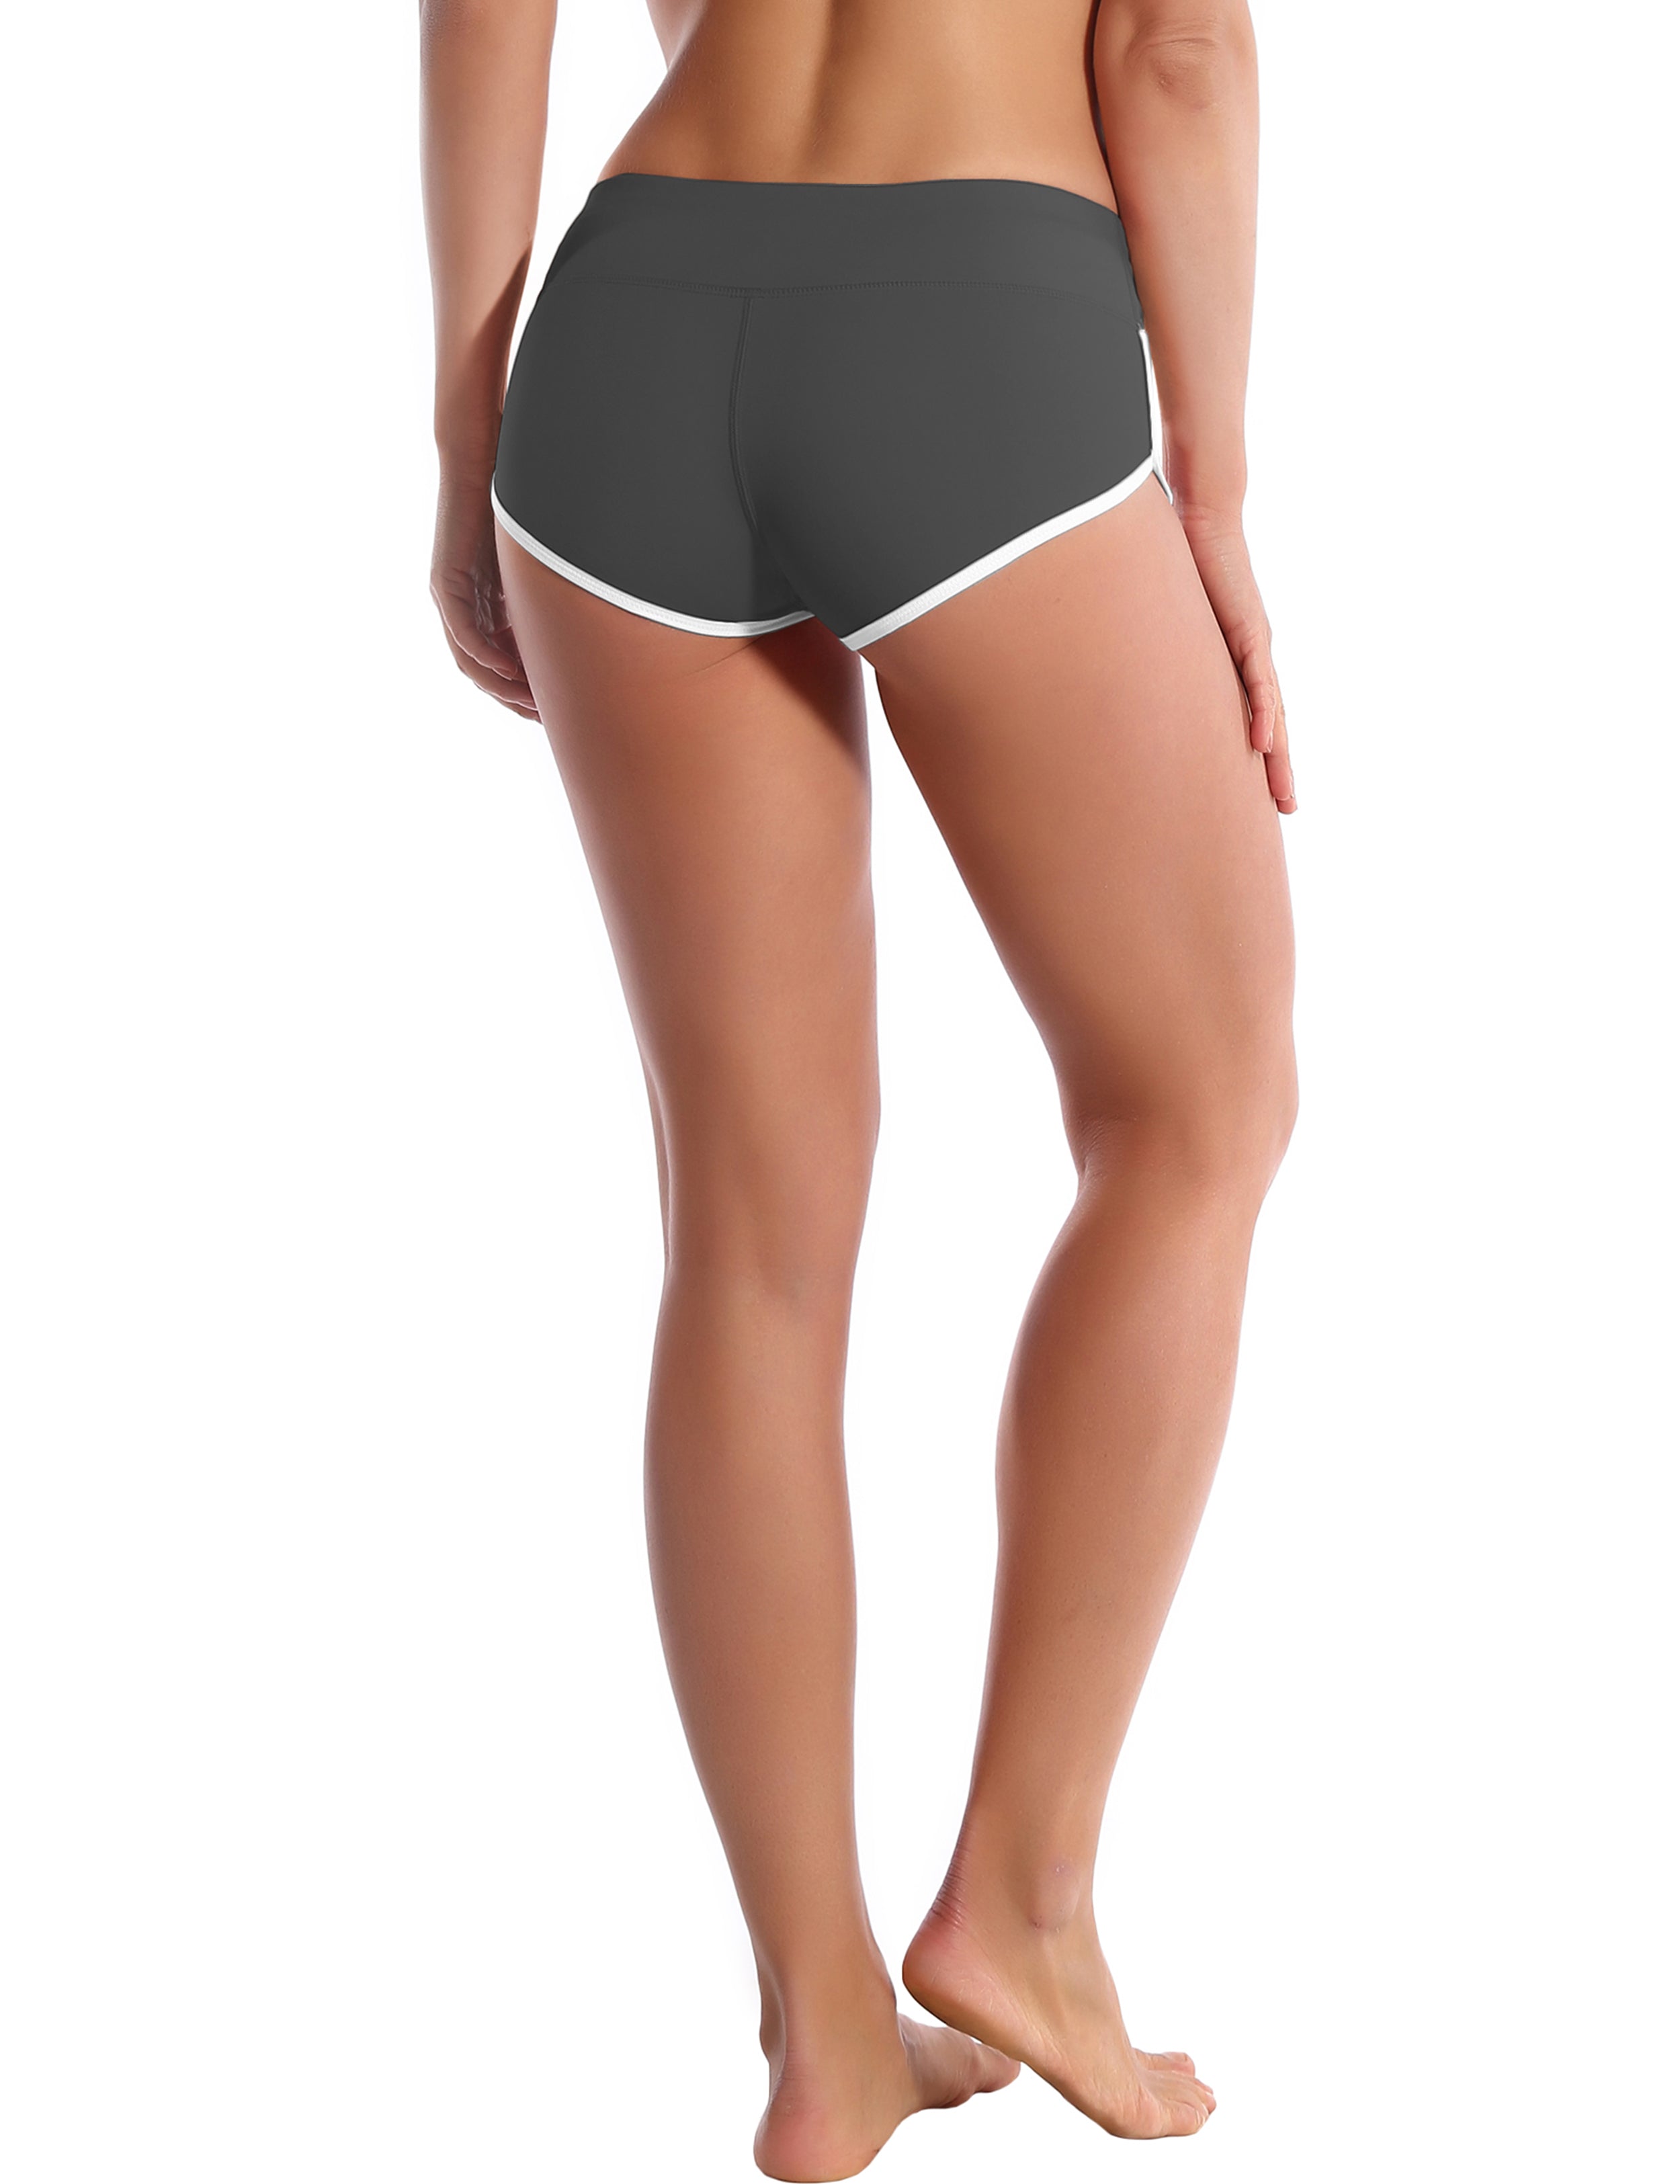 Sexy Booty Pilates Shorts shadowcharcoal Sleek, soft, smooth and totally comfortable: our newest sexy style is here. Softest-ever fabric High elasticity High density 4-way stretch Fabric doesn't attract lint easily No see-through Moisture-wicking Machine wash 75%Nylon/25%Spandex